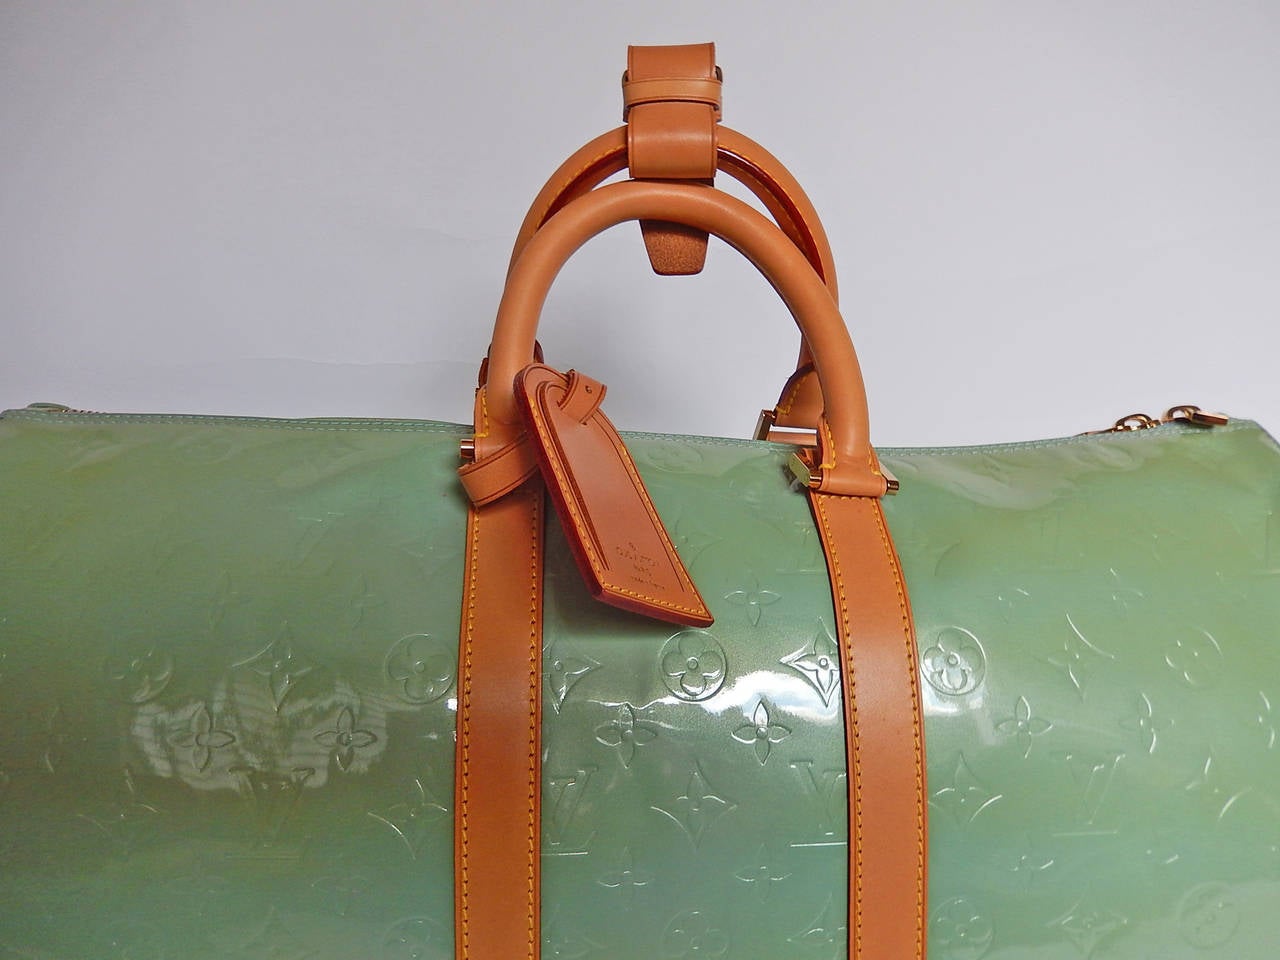 Mint blue/ green Vernis leather Louis Vuitton Keepall 45 with Vachetta leather trim, brass hardware, dual rolled handles, single interior zip pocket, single wall pocket and double LV zip closure.  Inside is all blue leather.
Handle Drop 5”, Height